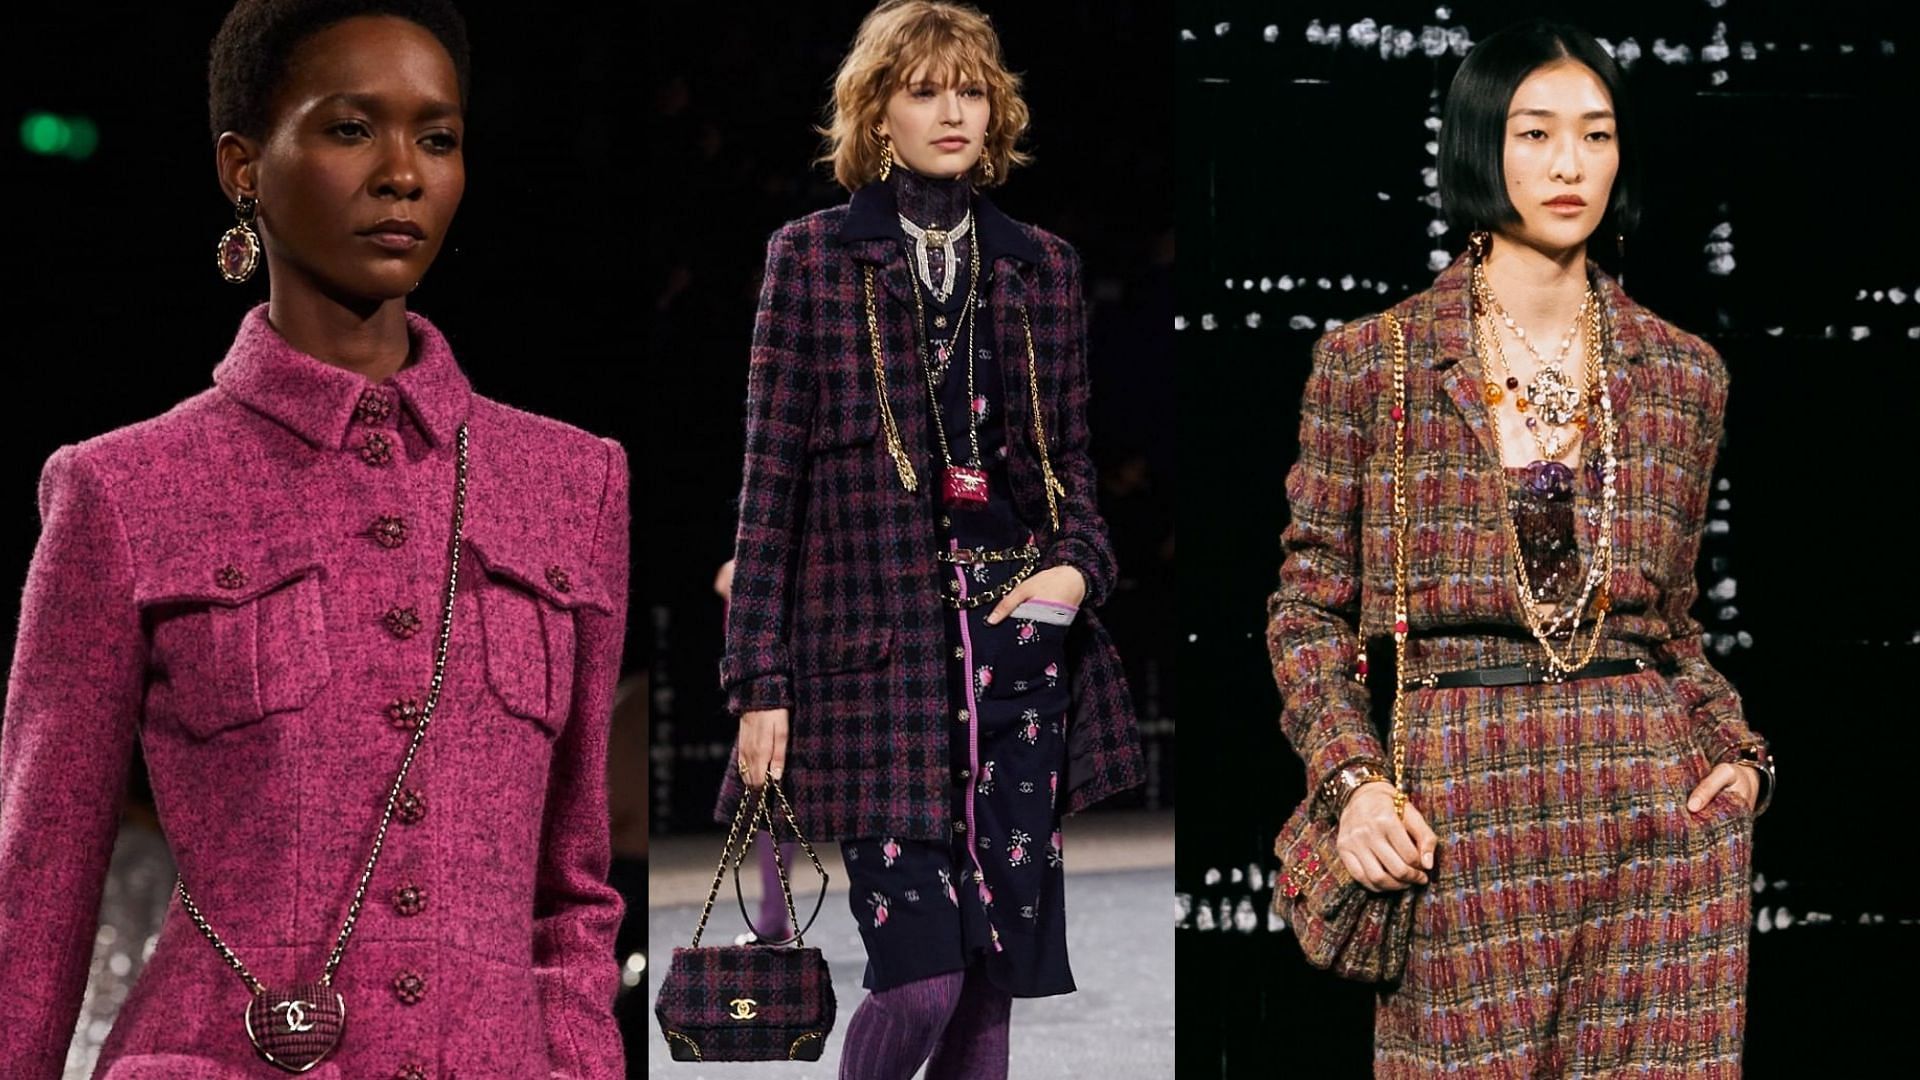 Snooze fest”: Chanel's take on tweed at Paris Fashion Week bores internet